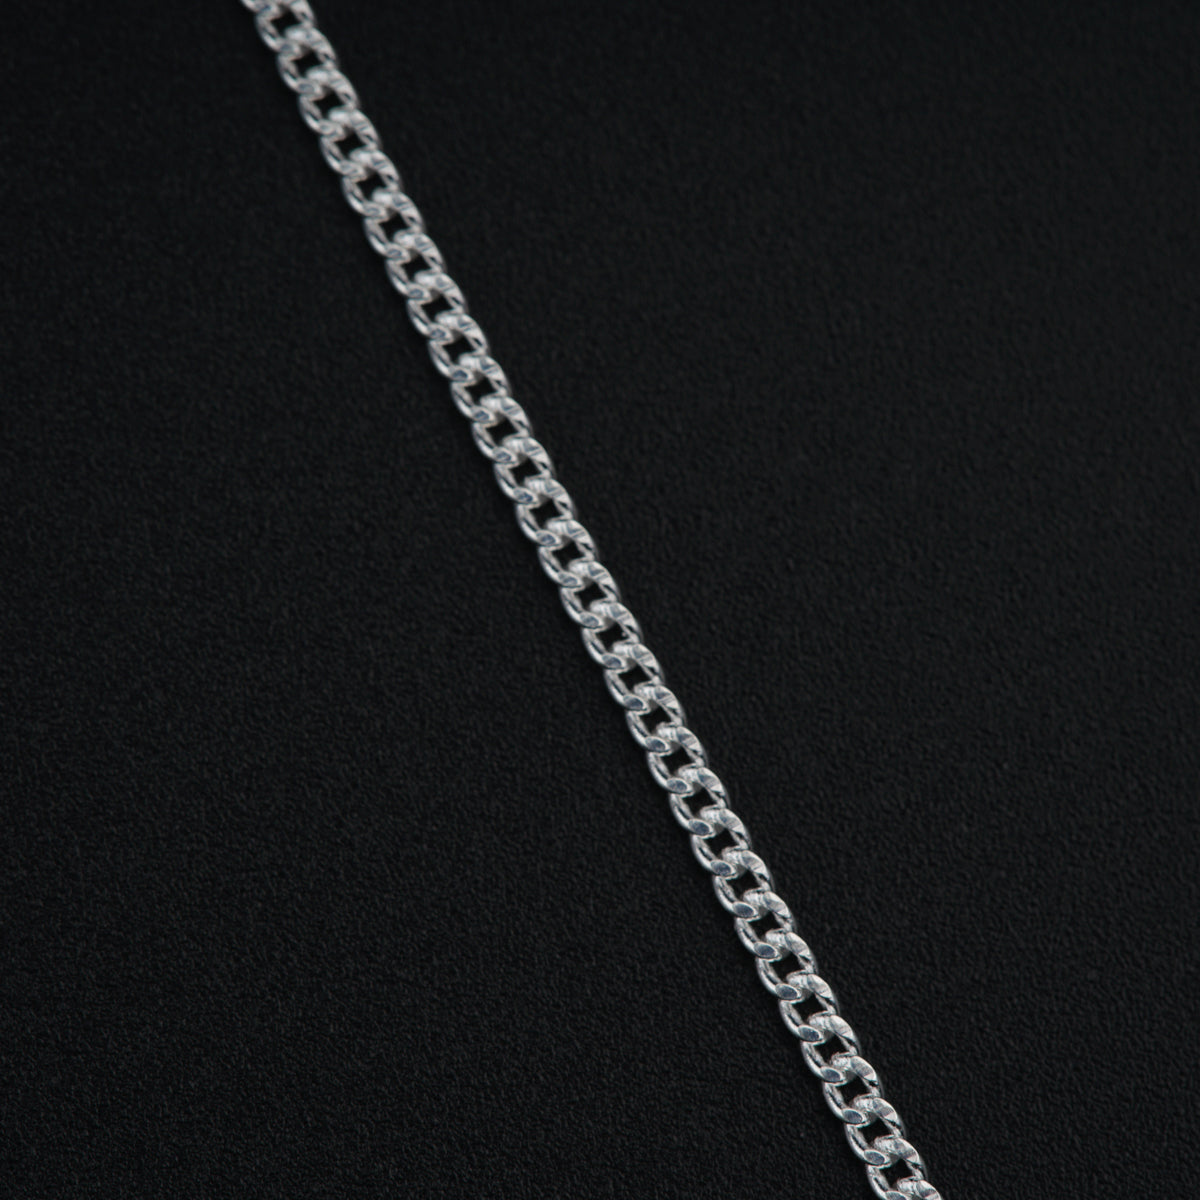 Silver Chain for Men / Women - ( 18 inches )